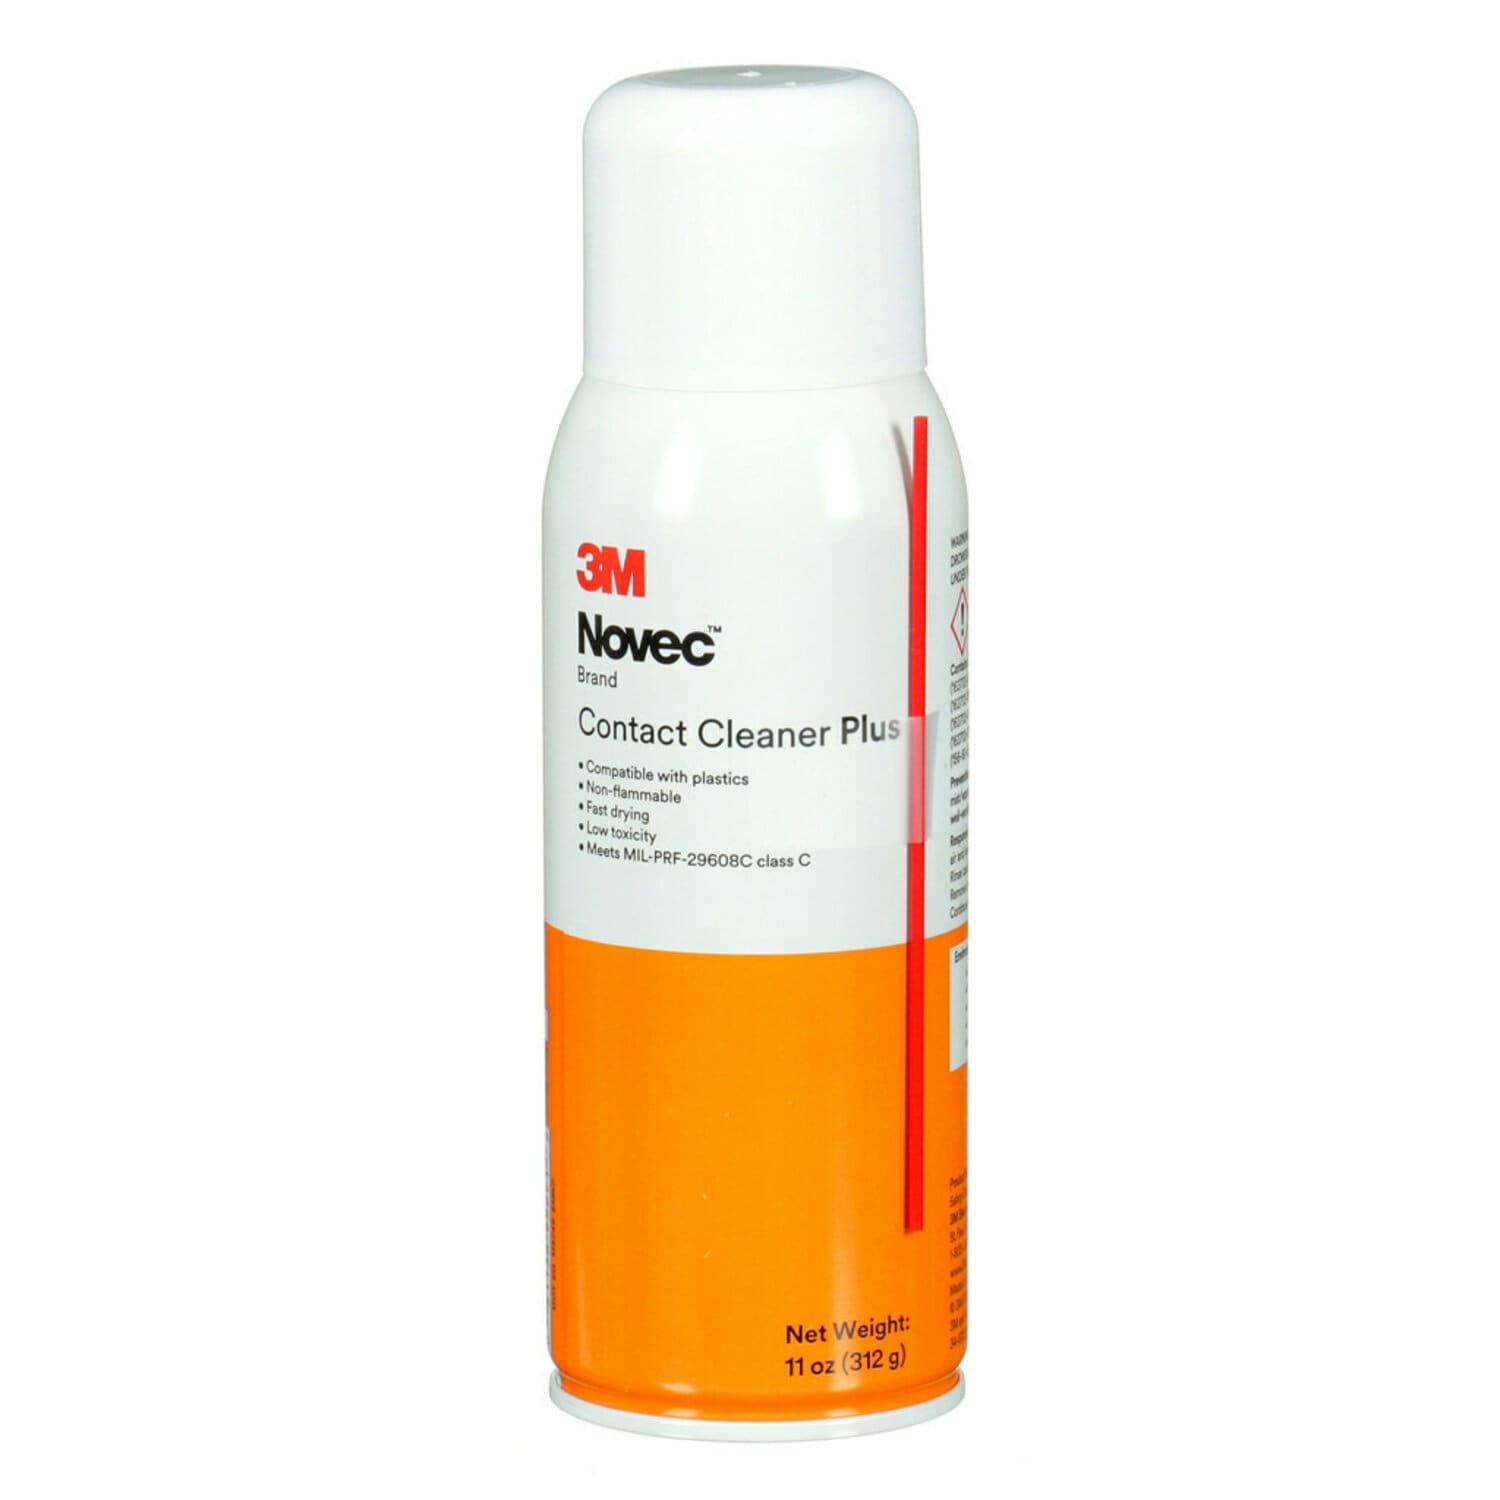 7010320317 - 3M Novec Contact Cleaner Plus, 312 g (11 oz), 1 Canister/Case